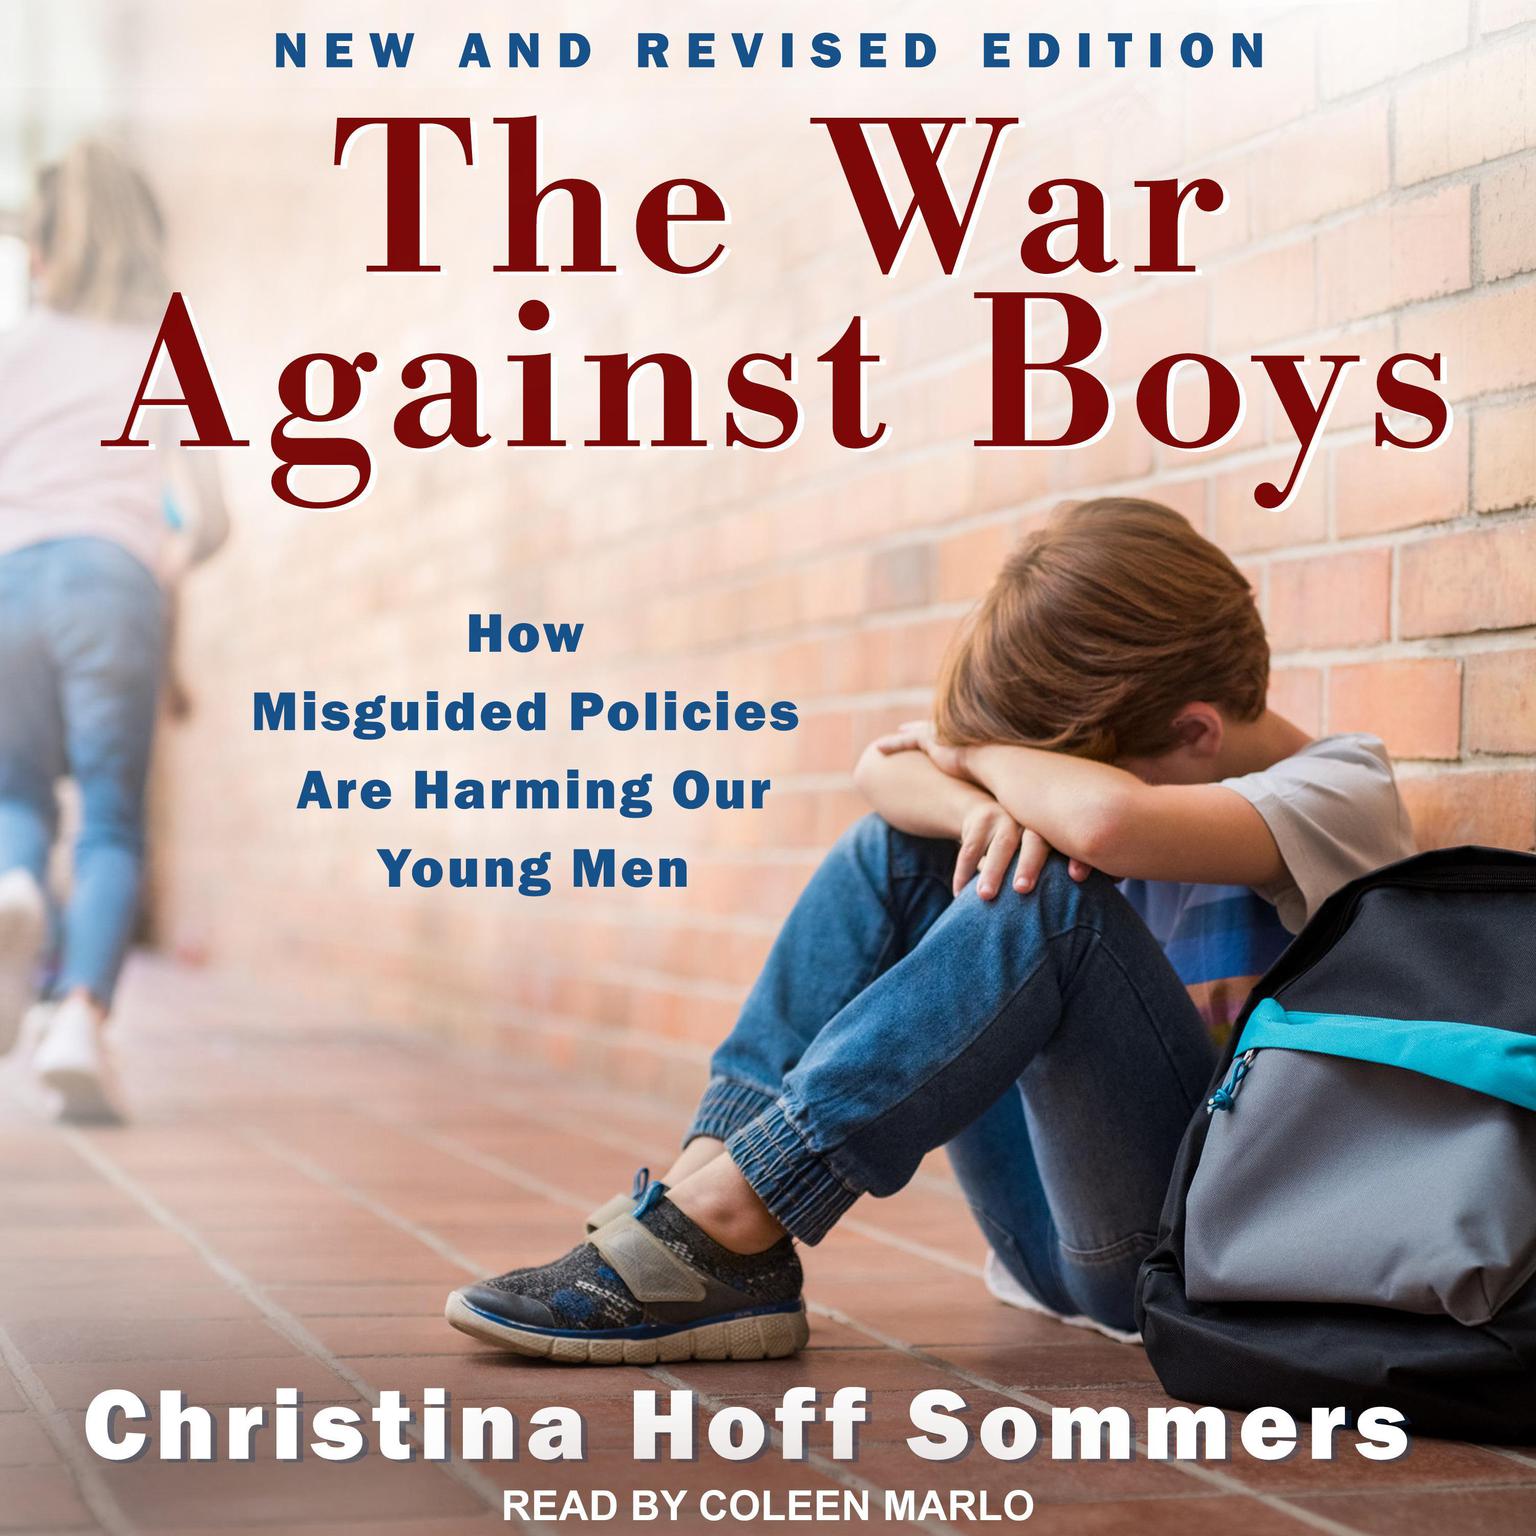 The War Against Boys: How Misguided Policies are Harming Our Young Men Audiobook, by Christina Hoff Sommers